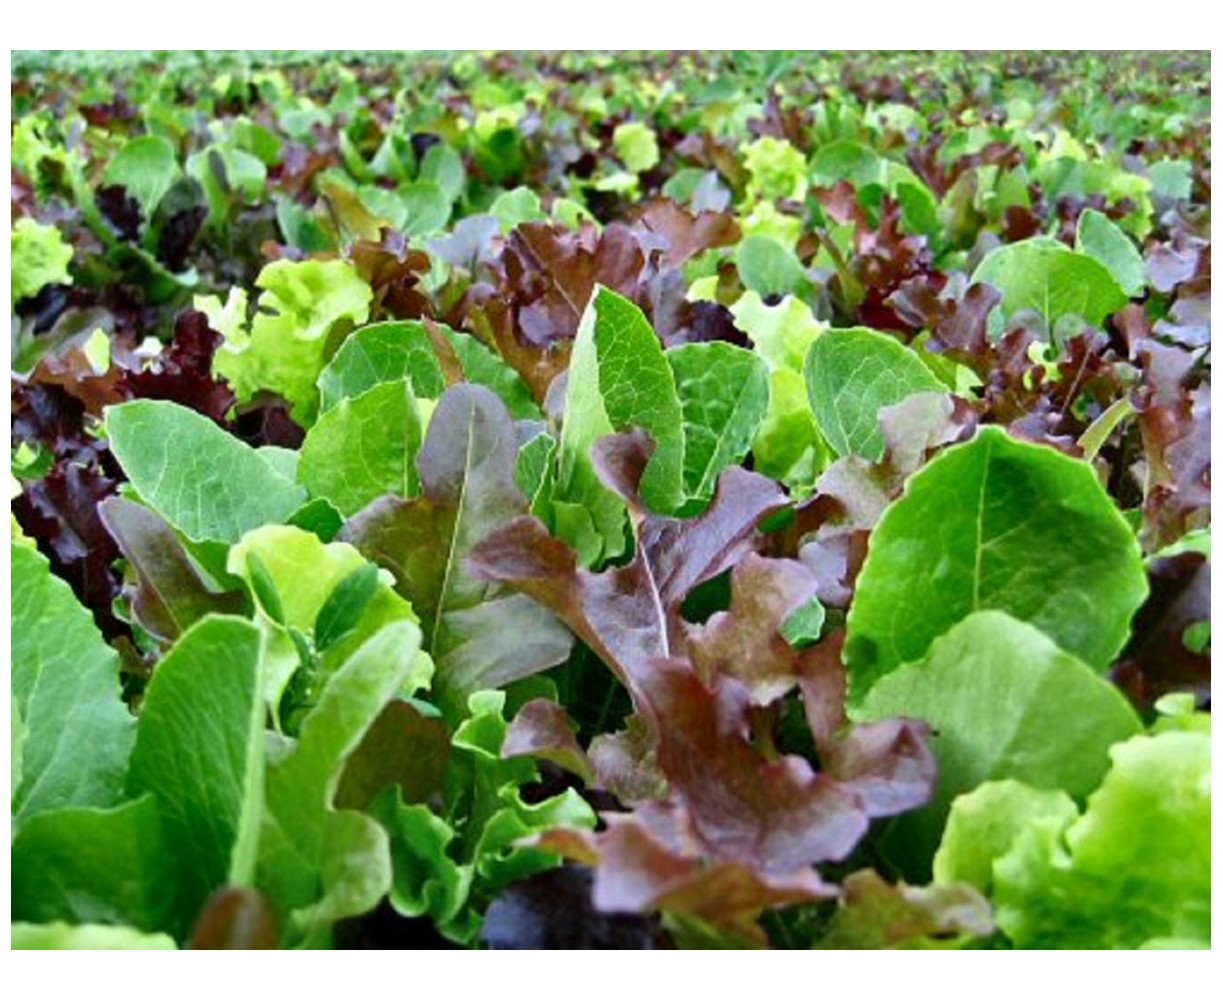 2018 Seeds            Max Shipping $1.69/order Mesclun Lettuce Seeds 1,000 